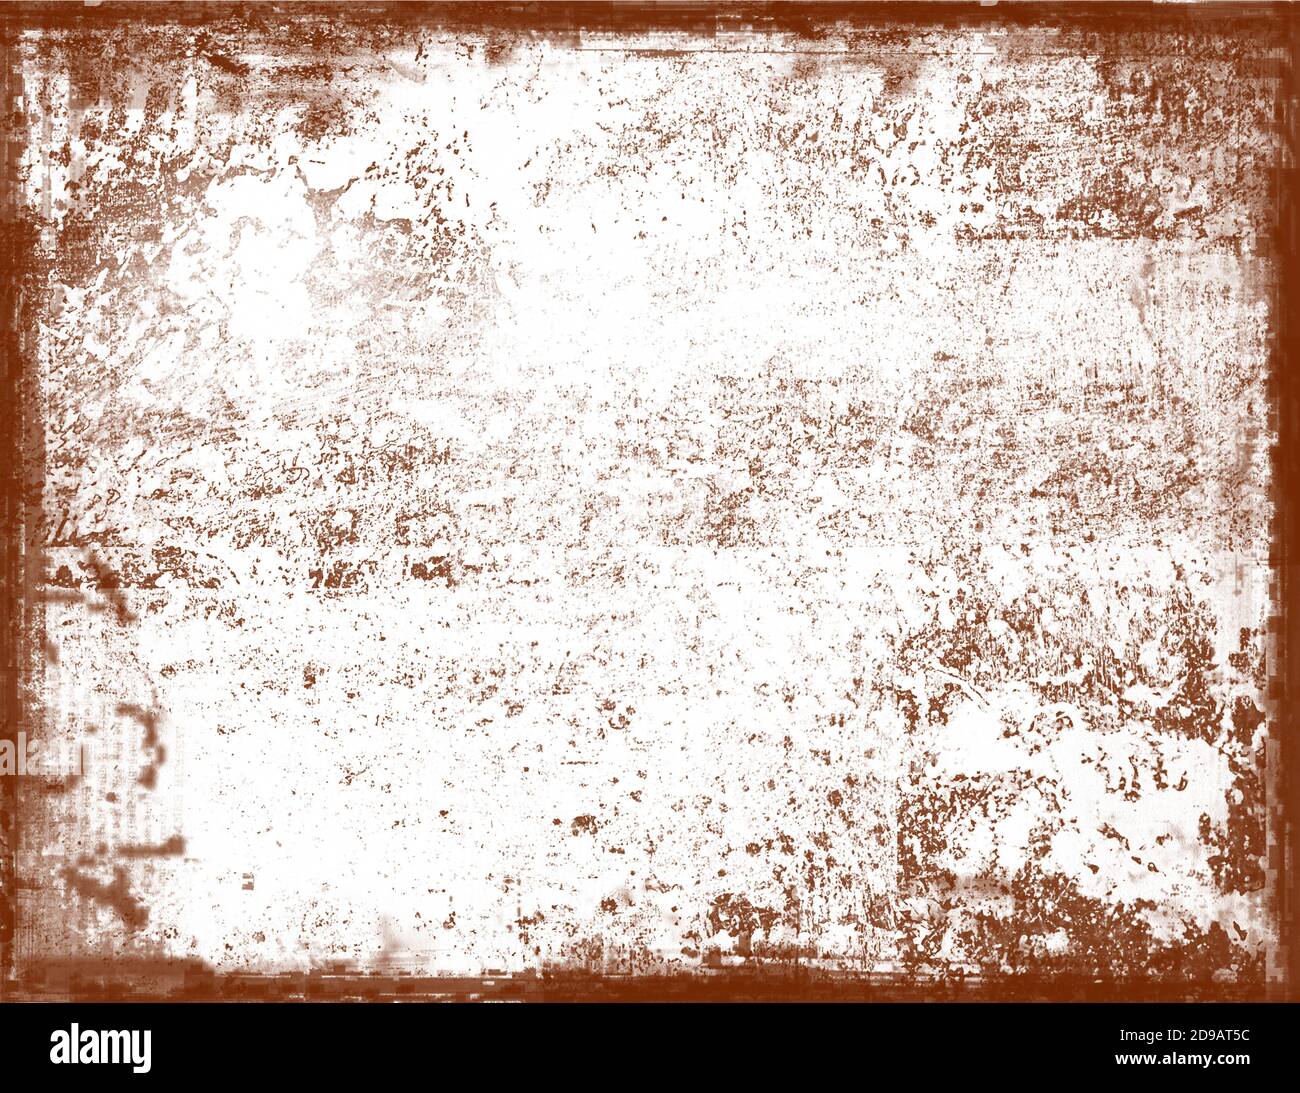 Grunge texture background, frame vintage effect. Royalty high-quality free  stock photo image of abstract old frame grunge texture, distressed overlay  Stock Photo - Alamy